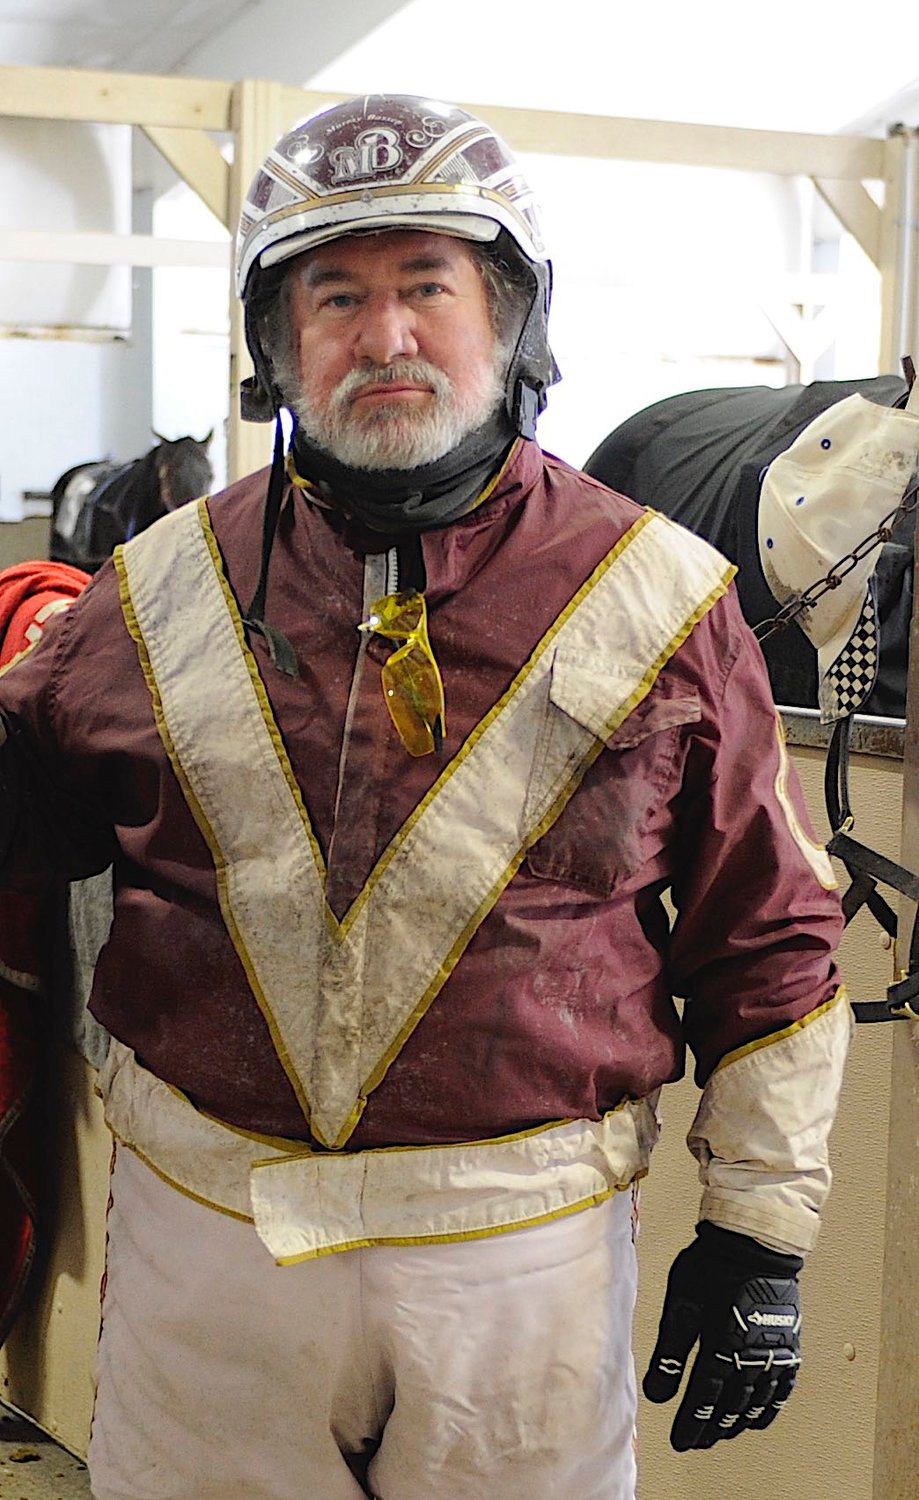 Veteran horseman Murray Bassen strikes a pose in the Monticello Raceway paddock in early January 2021.